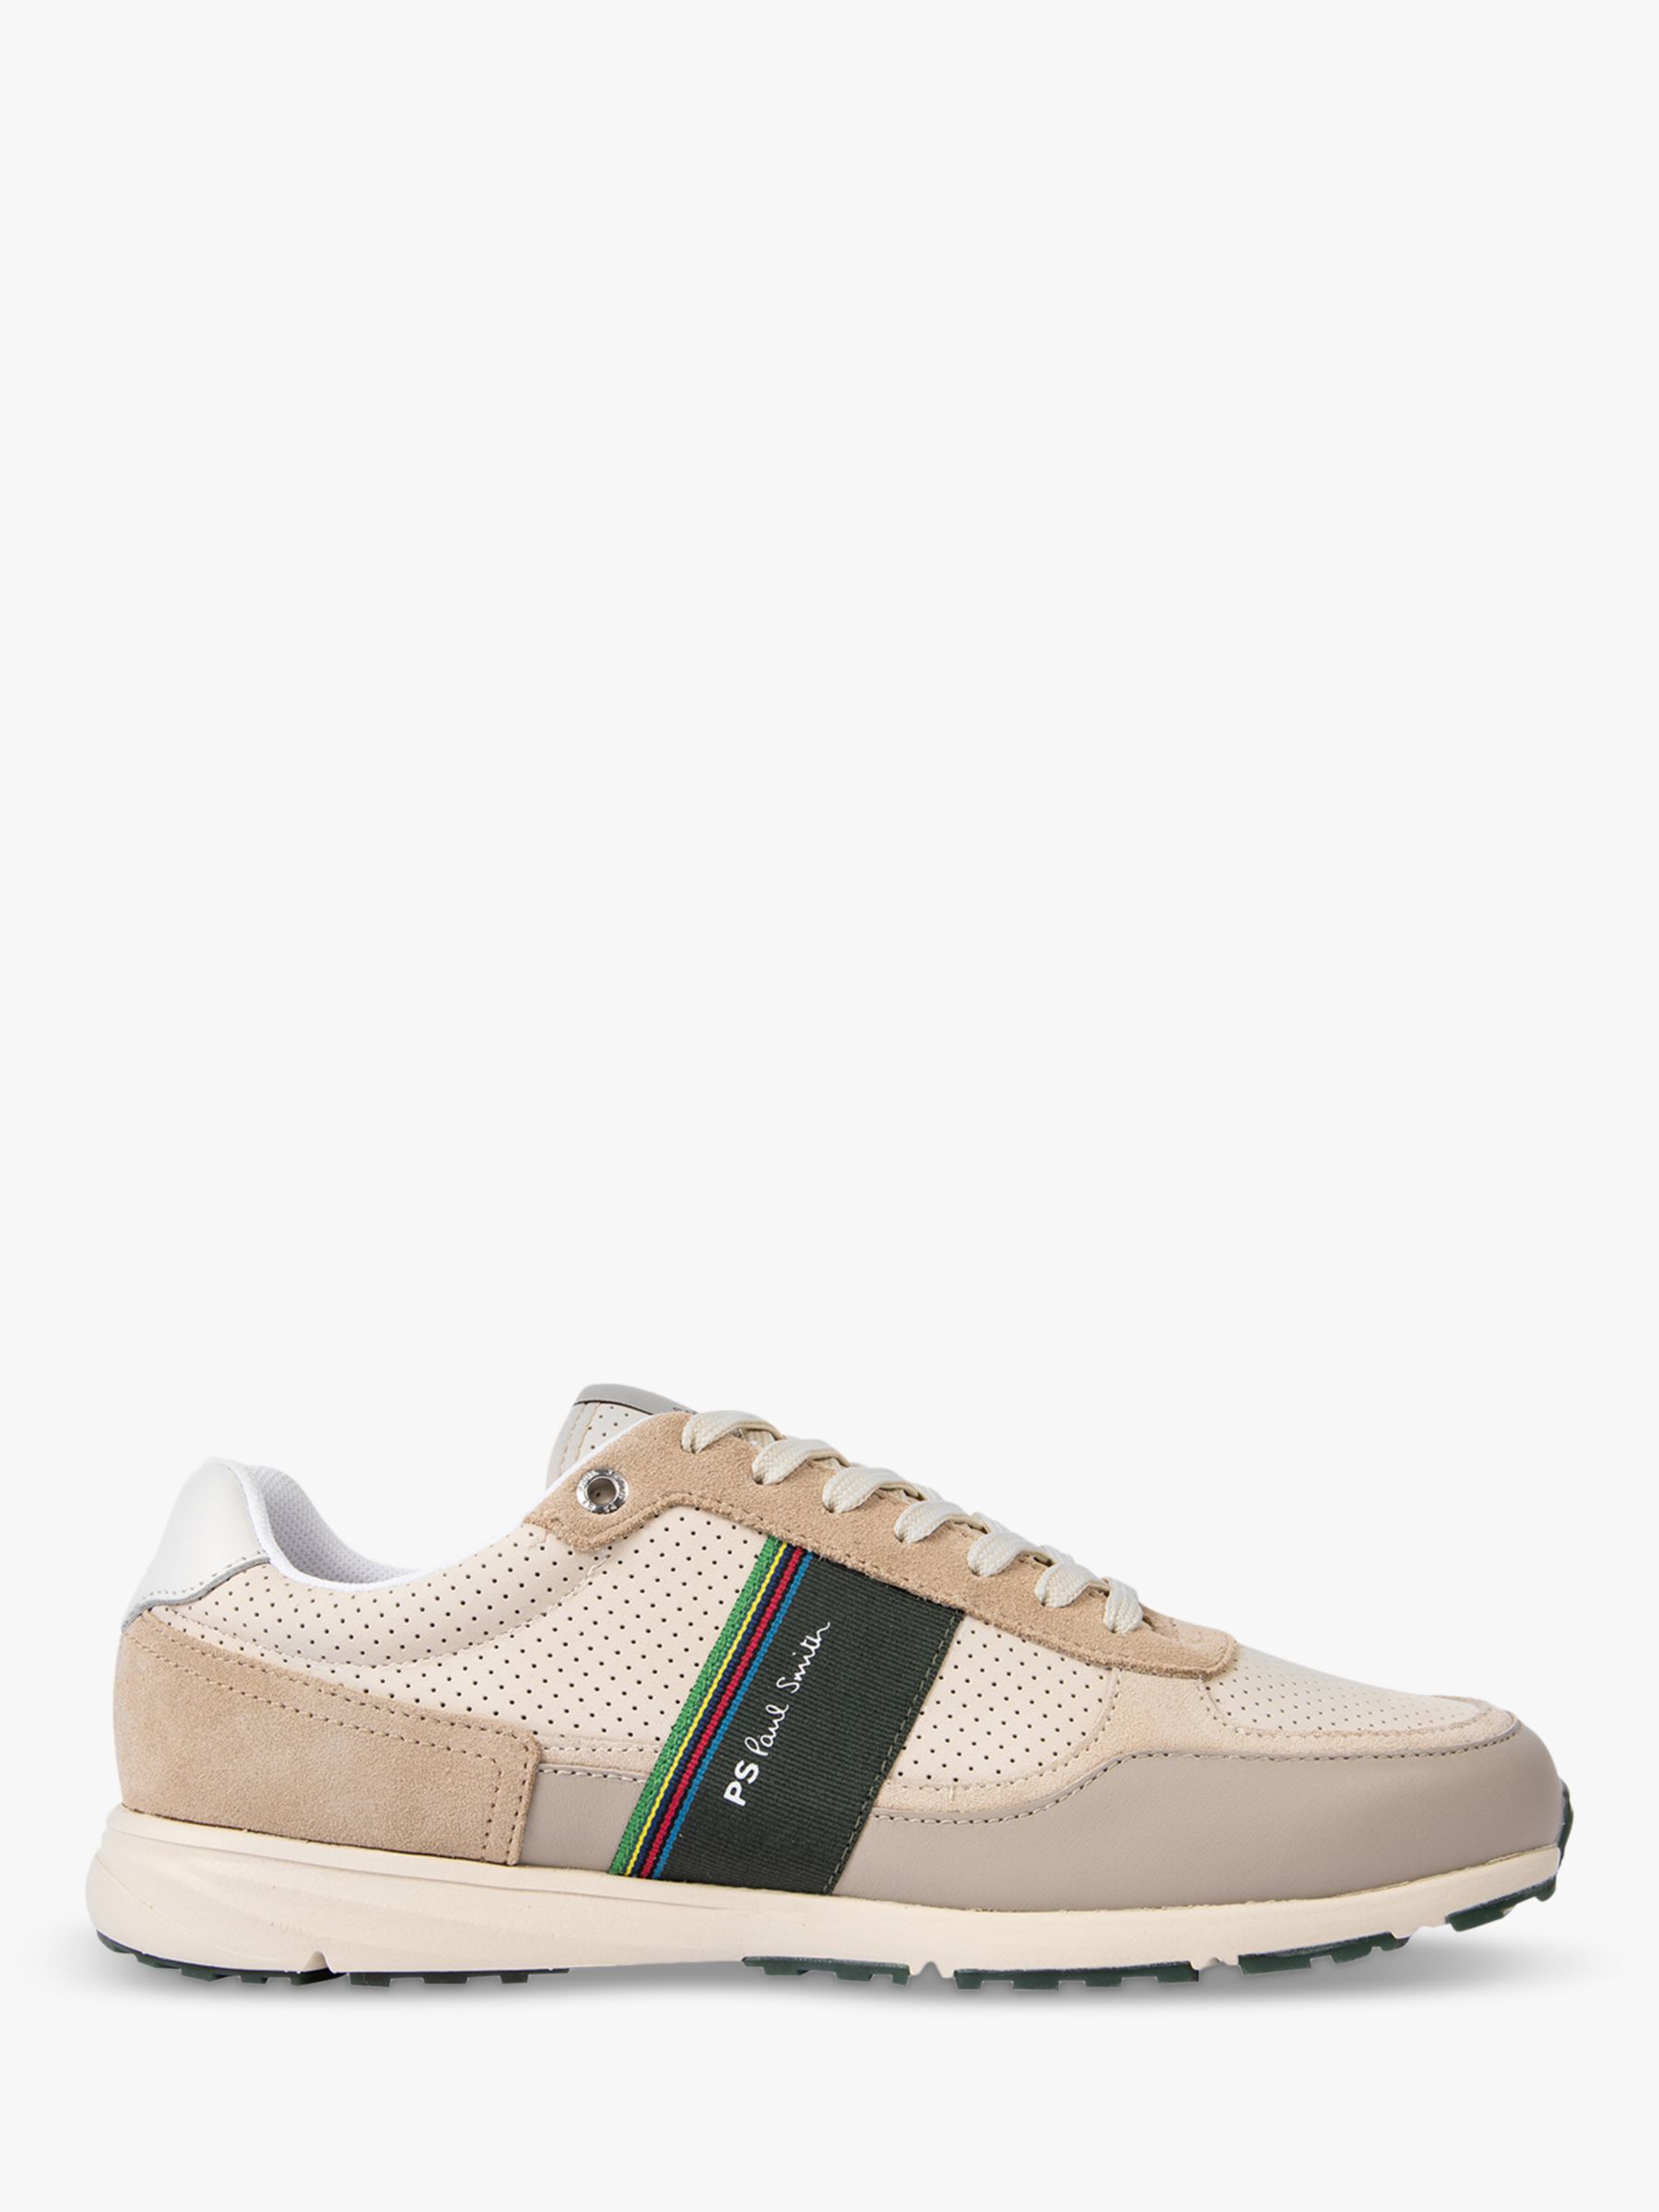 Paul Smith Huey Suede Trainers, Off White at John Lewis & Partners